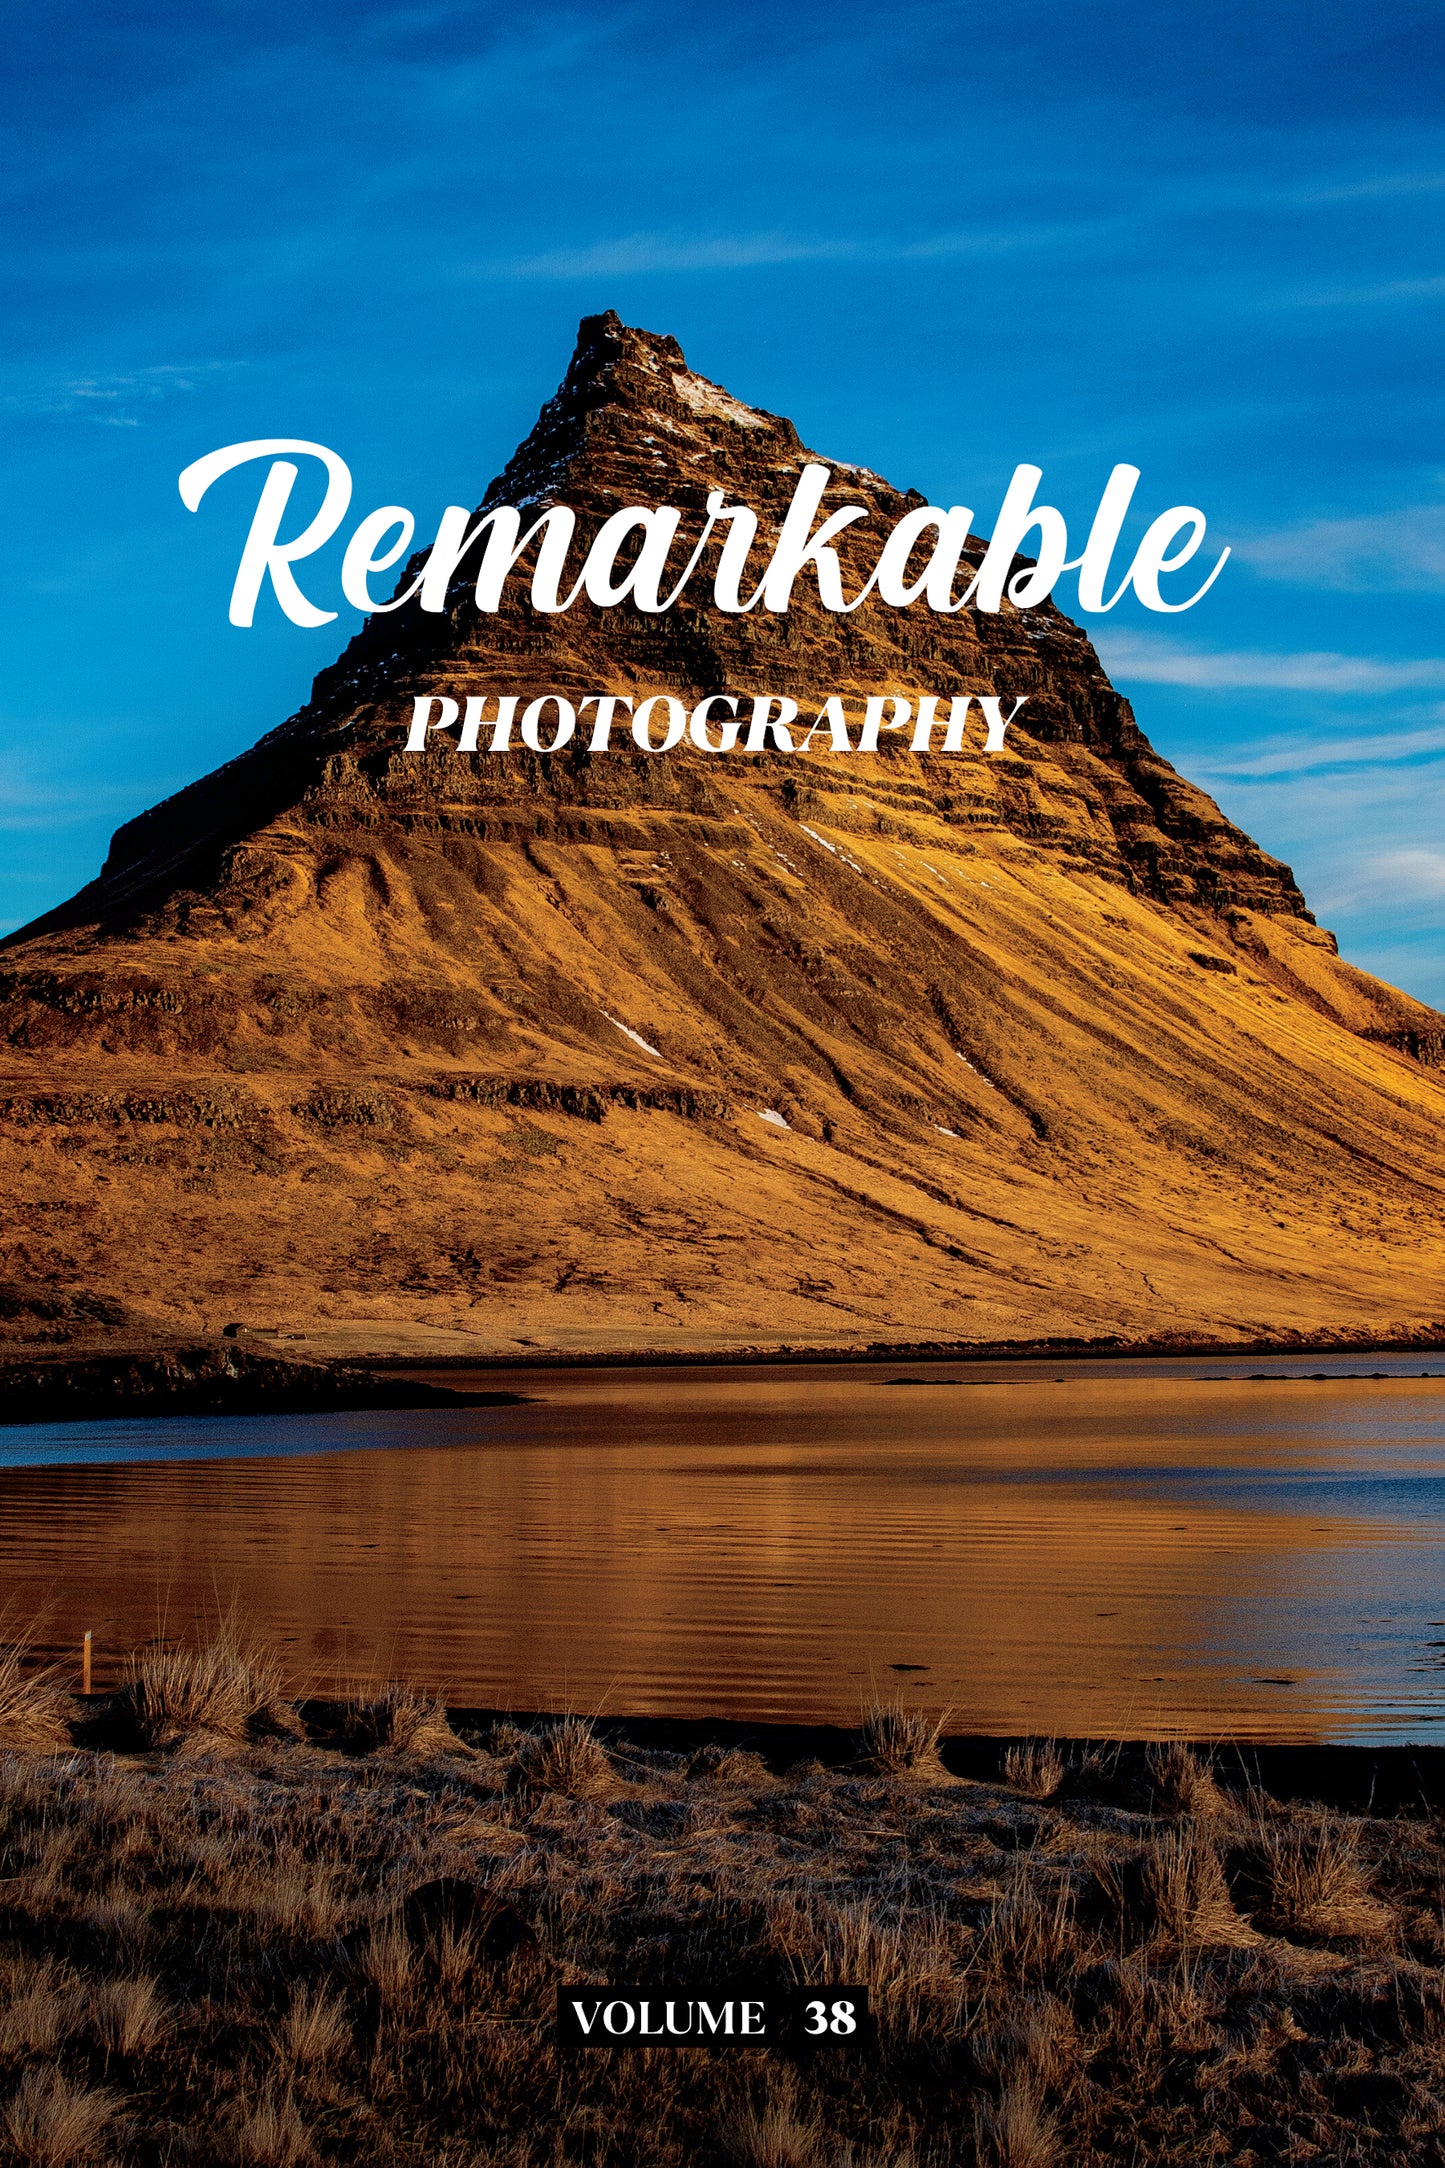 Remarkable Photography Volume 38 (Physical Book Pre-Order)